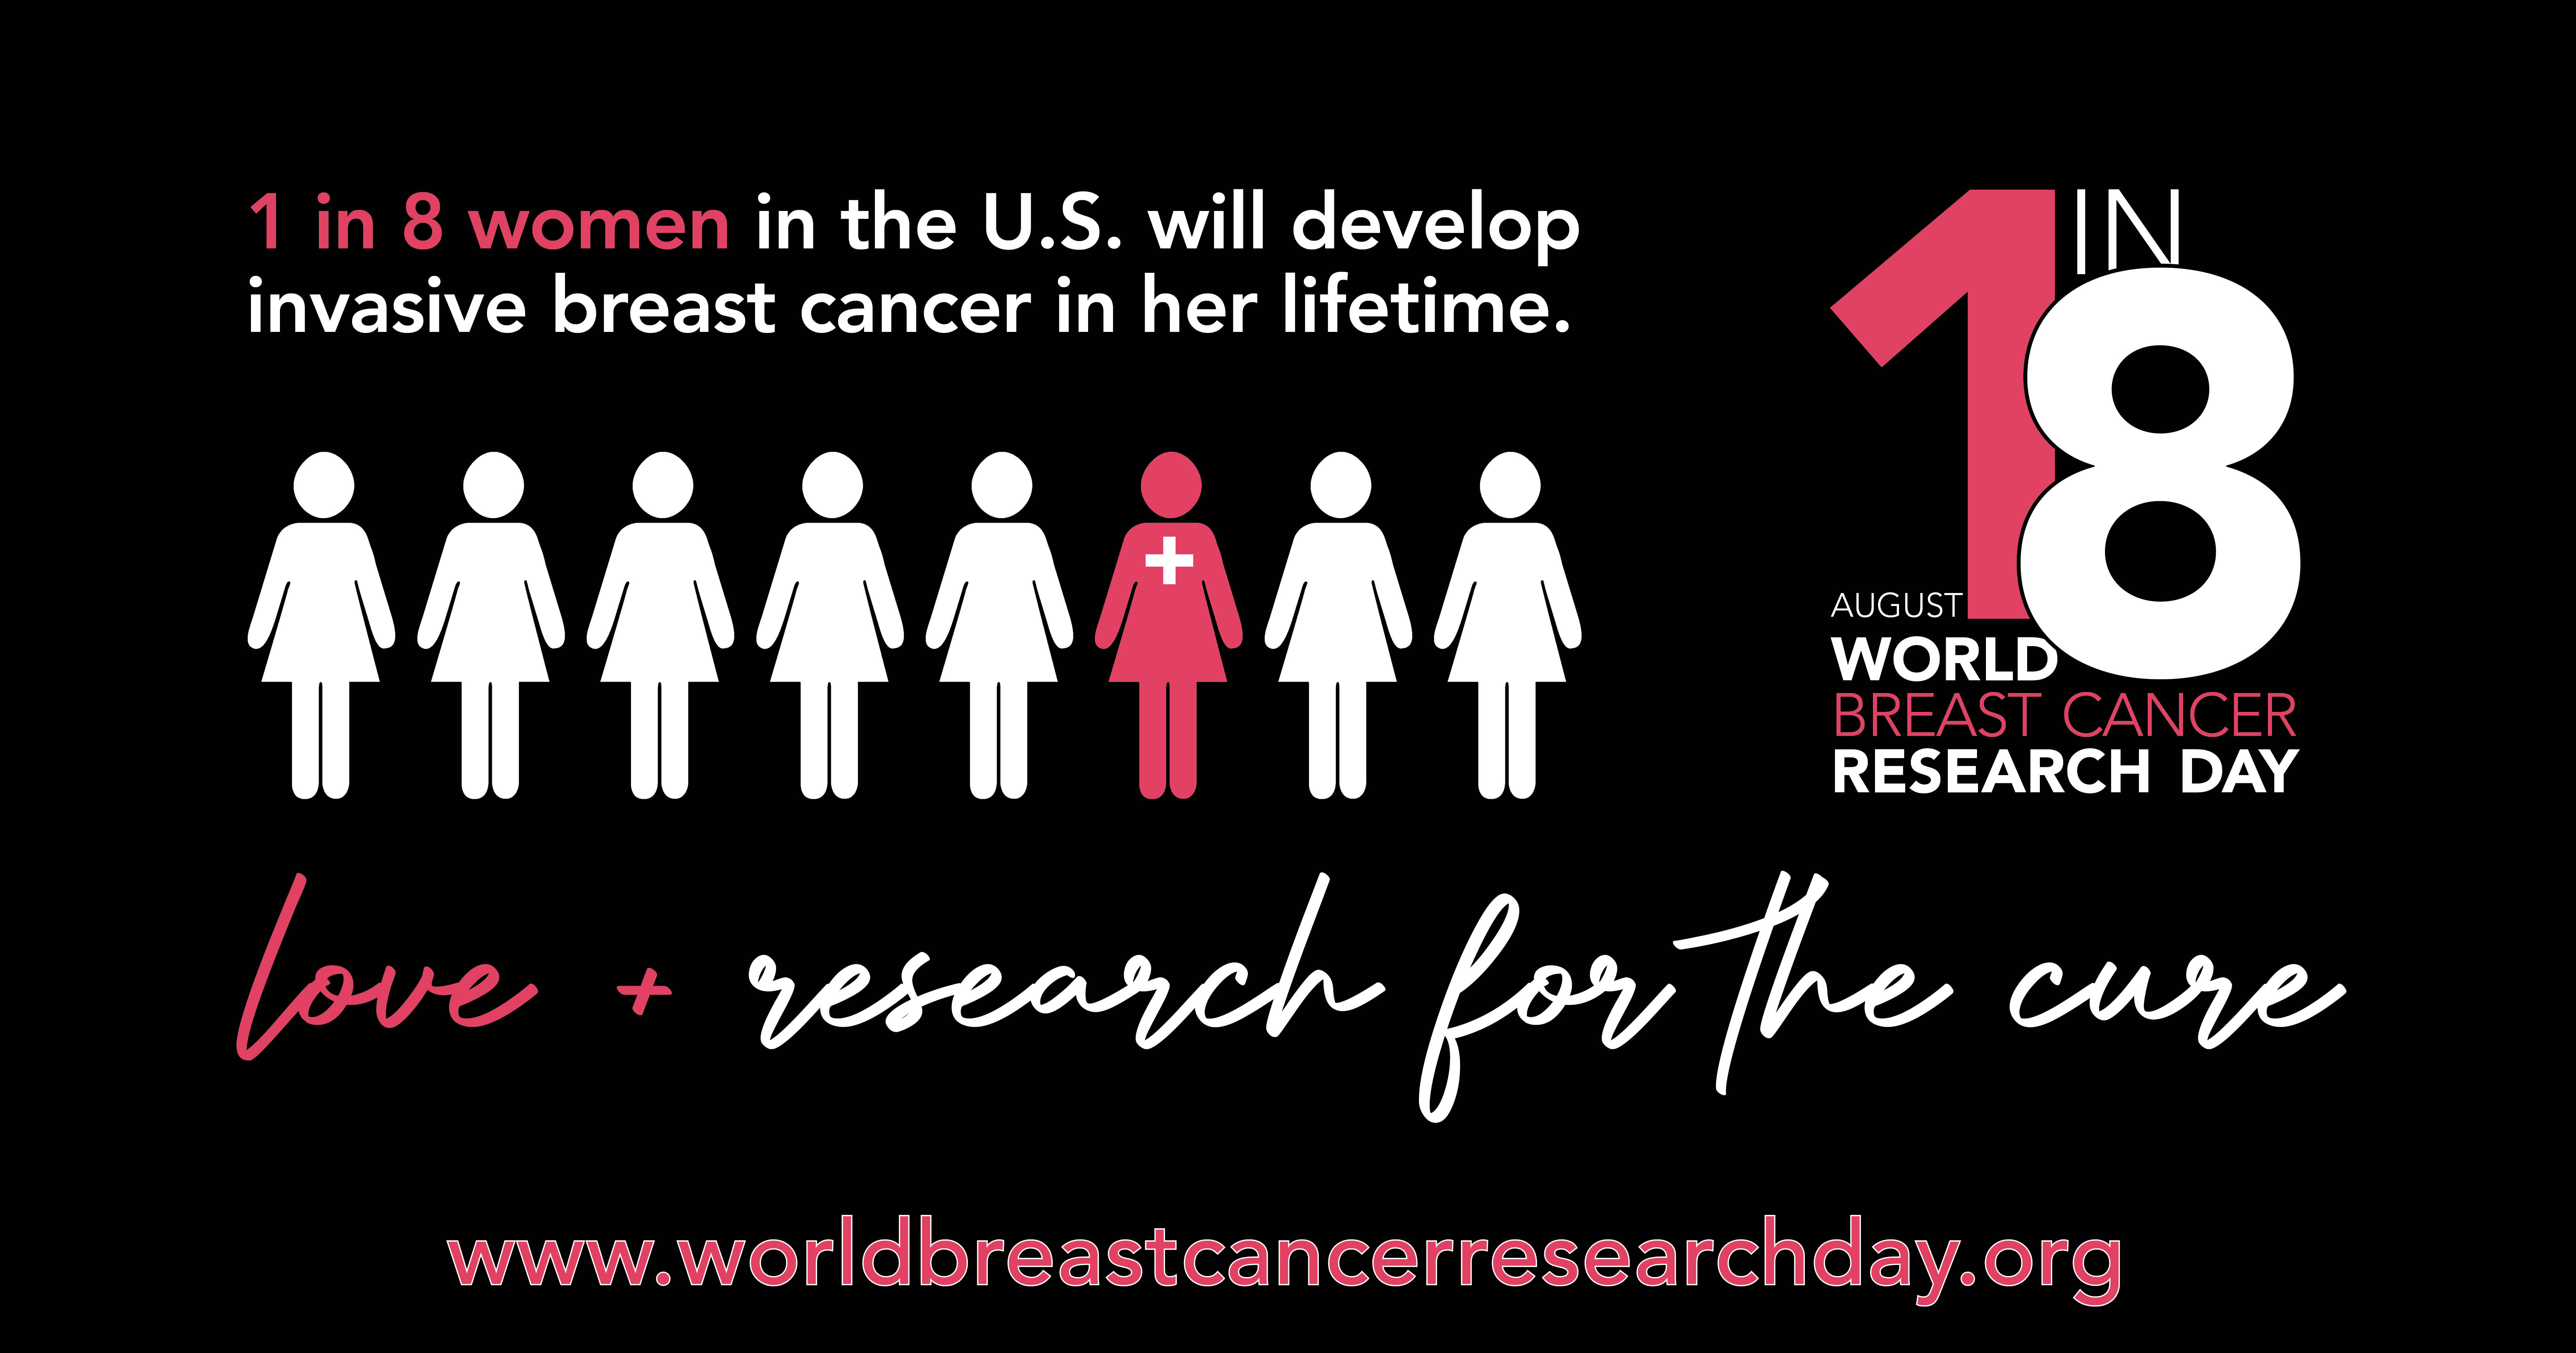 research topics related to breast cancer